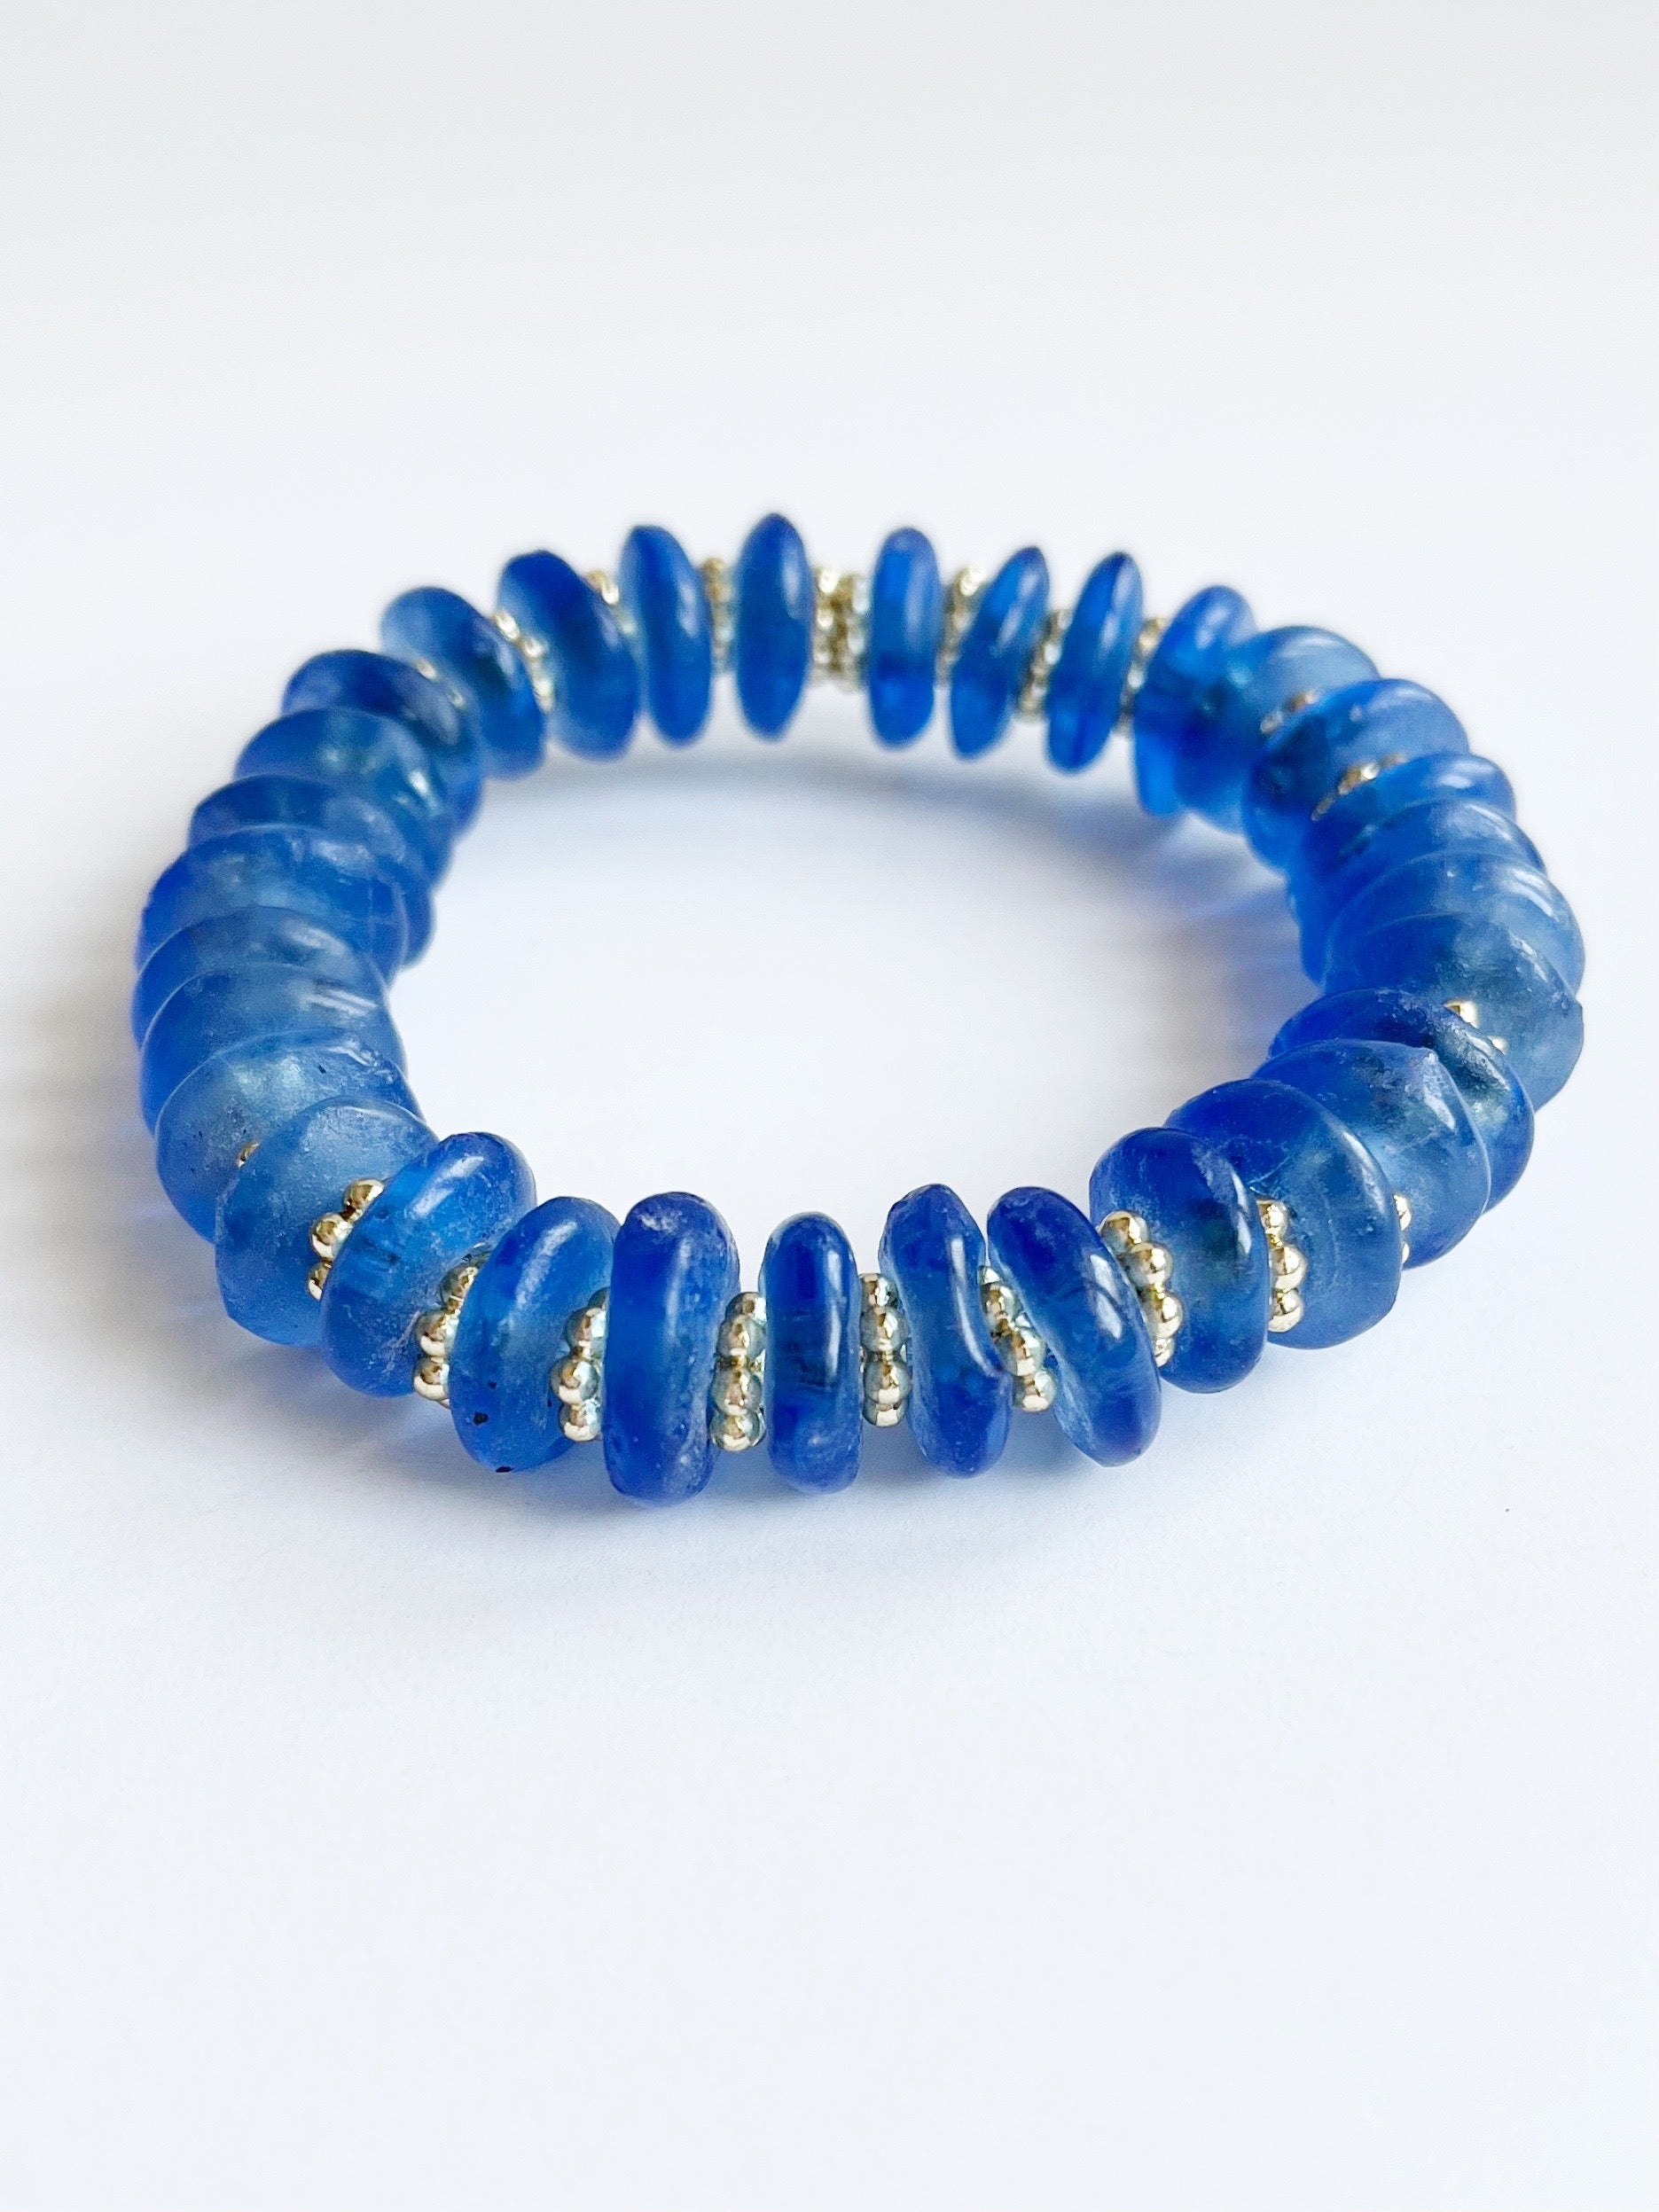 blue recycled glass and yellow gold bead bracelet